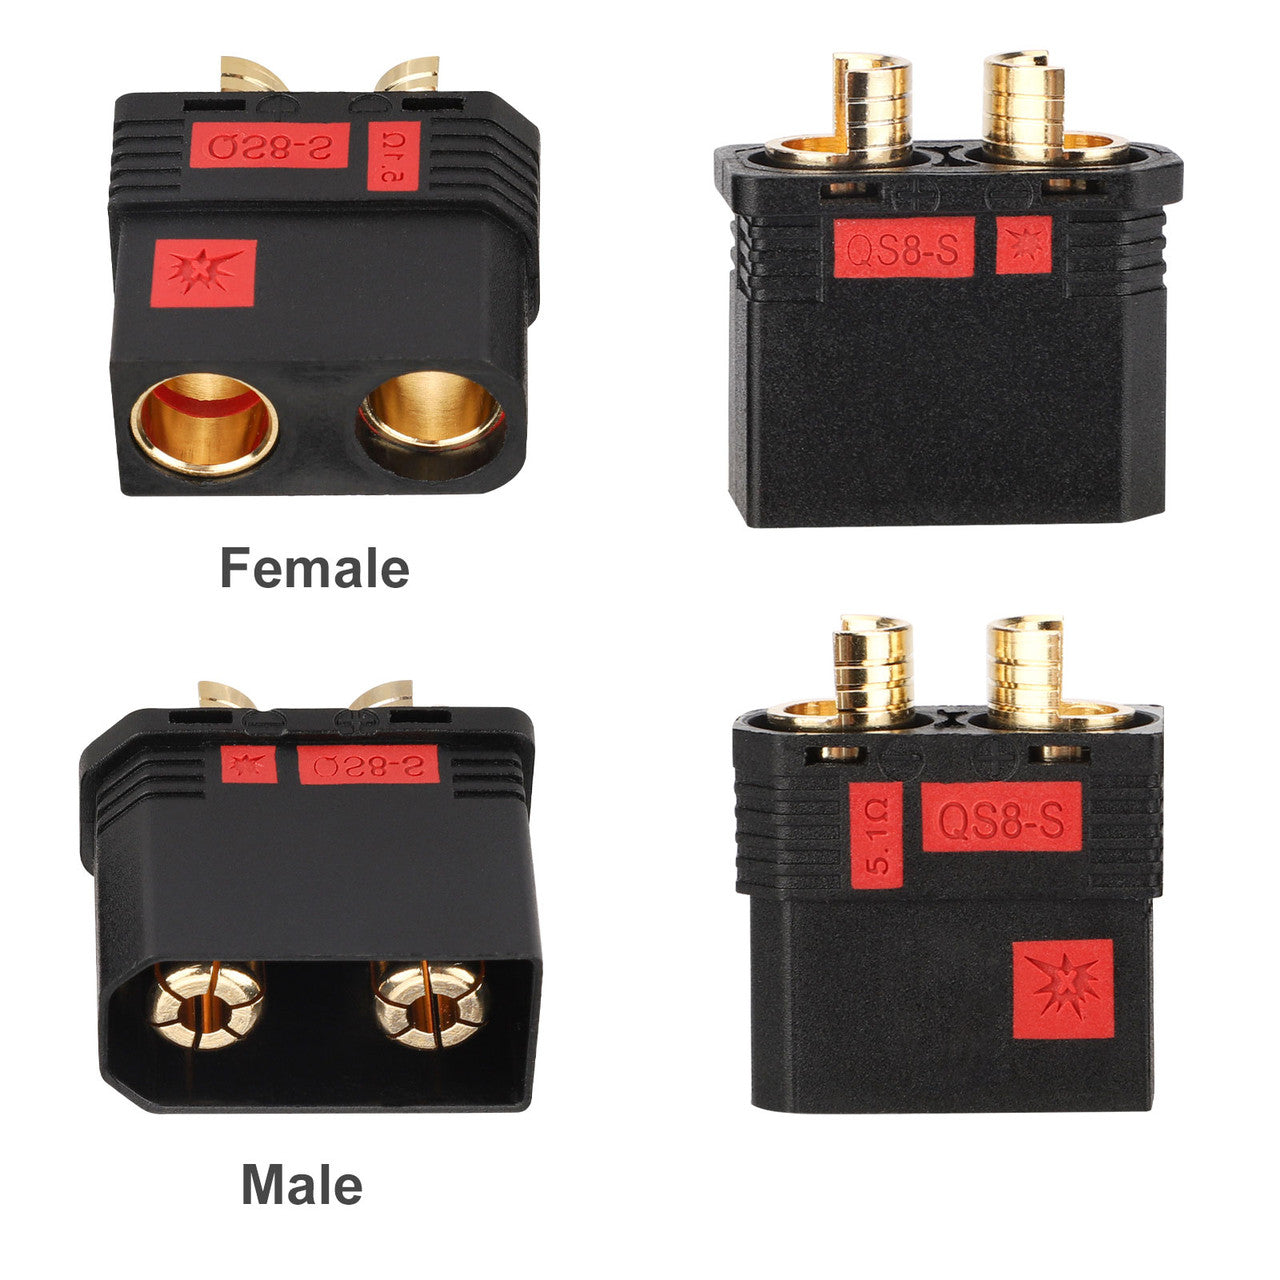 Anti-Spark Connector for Lipo Battery for RC cars,Male to Female Connector, 2pcs